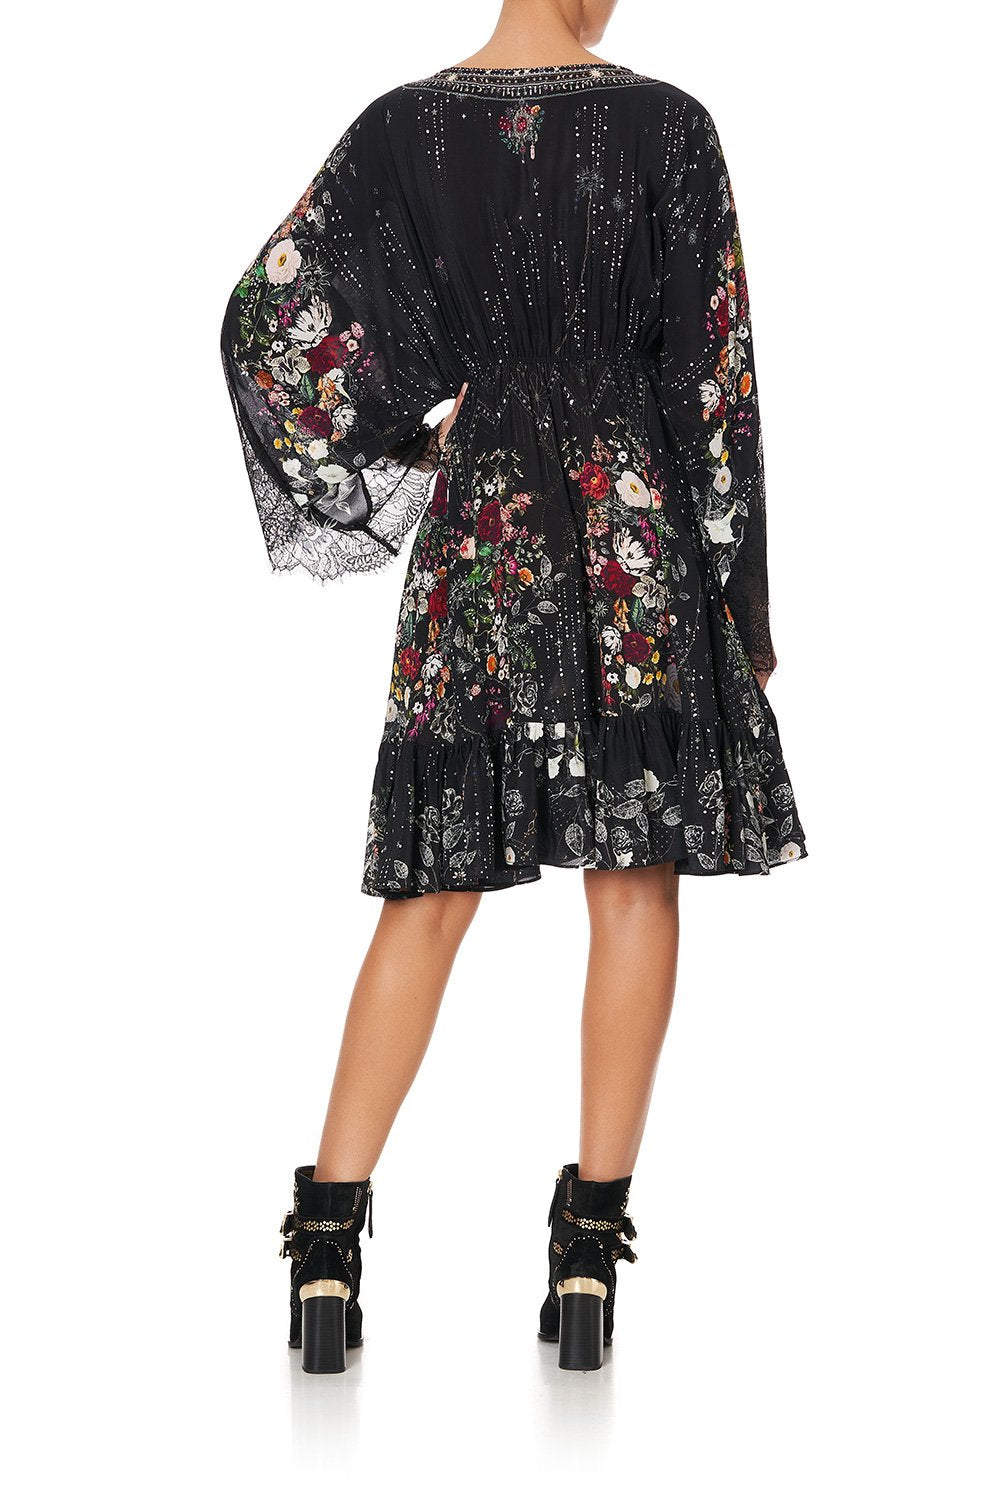 SHORT DRESS WITH LACE SLEEVE TO THE GYPSY